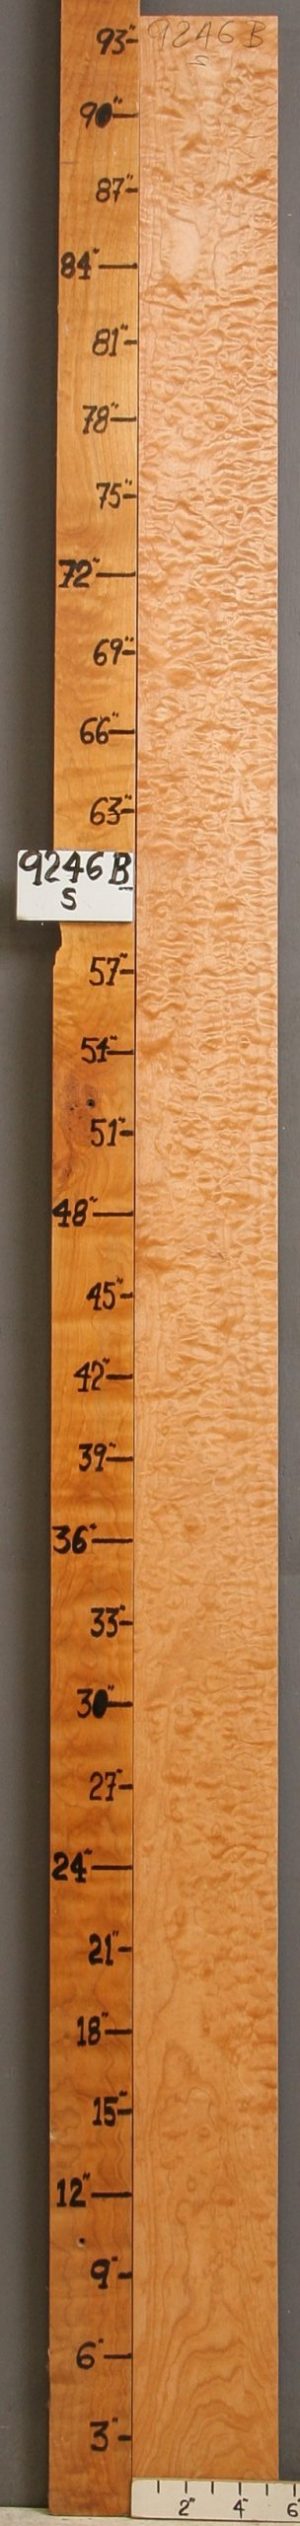 MUSICAL QUILTED MAPLE LUMBER 5"1/4 X 94" X 4/4 (NWT-9246B)